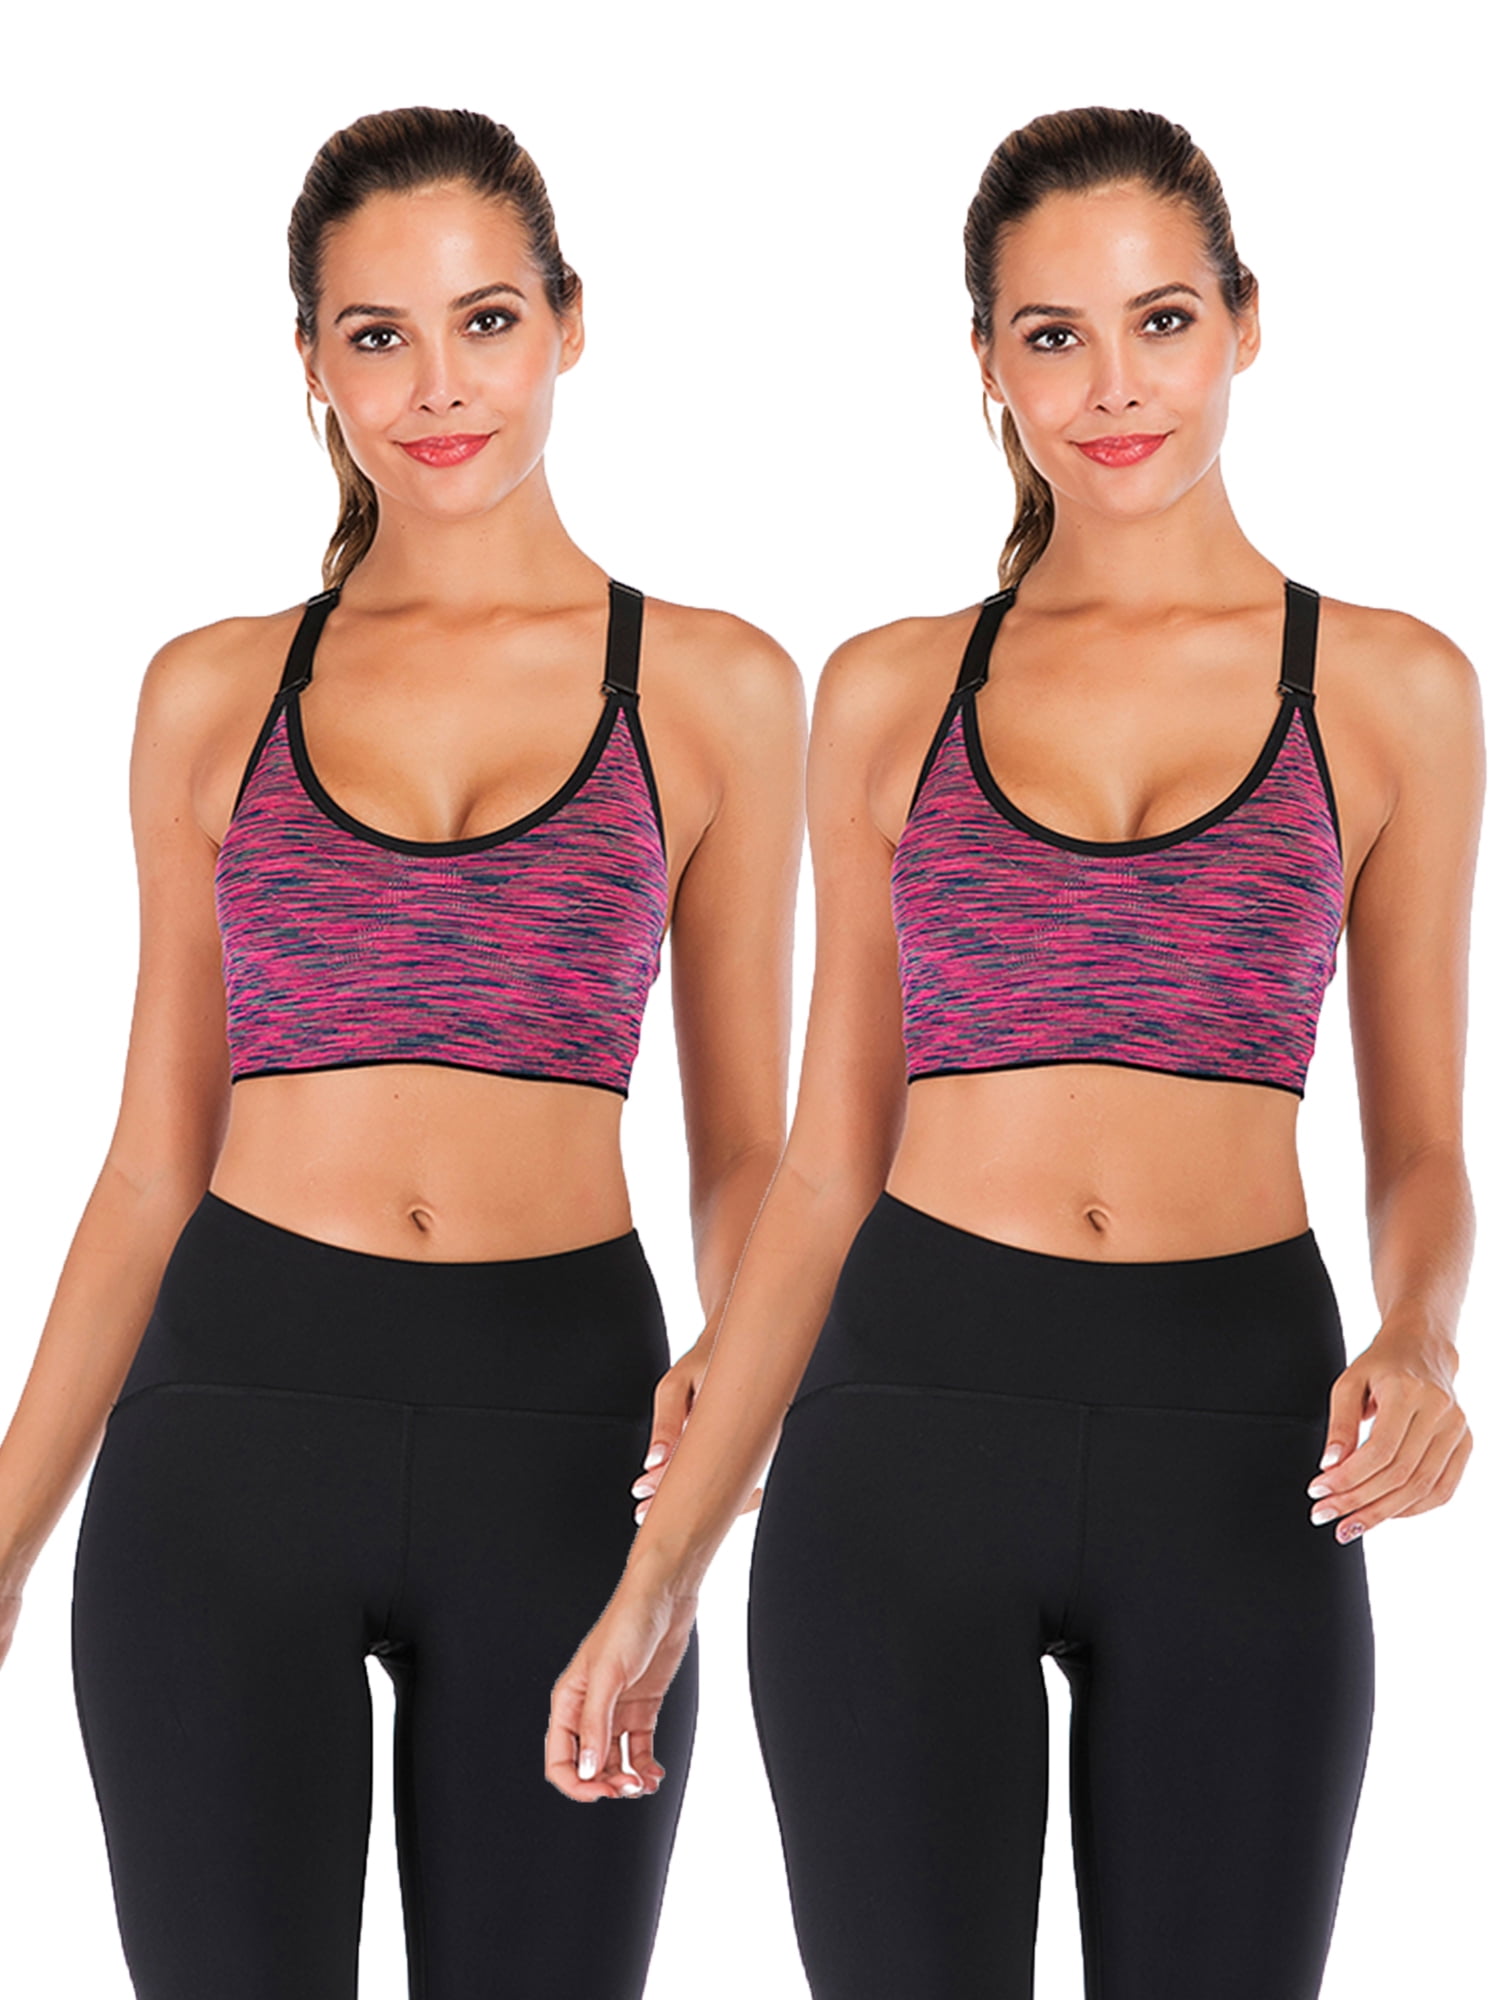 PRO FIT Womens Sports Bra Cotton/Nylon Blend Yoga Pullover Activewear High Impact Support Bras